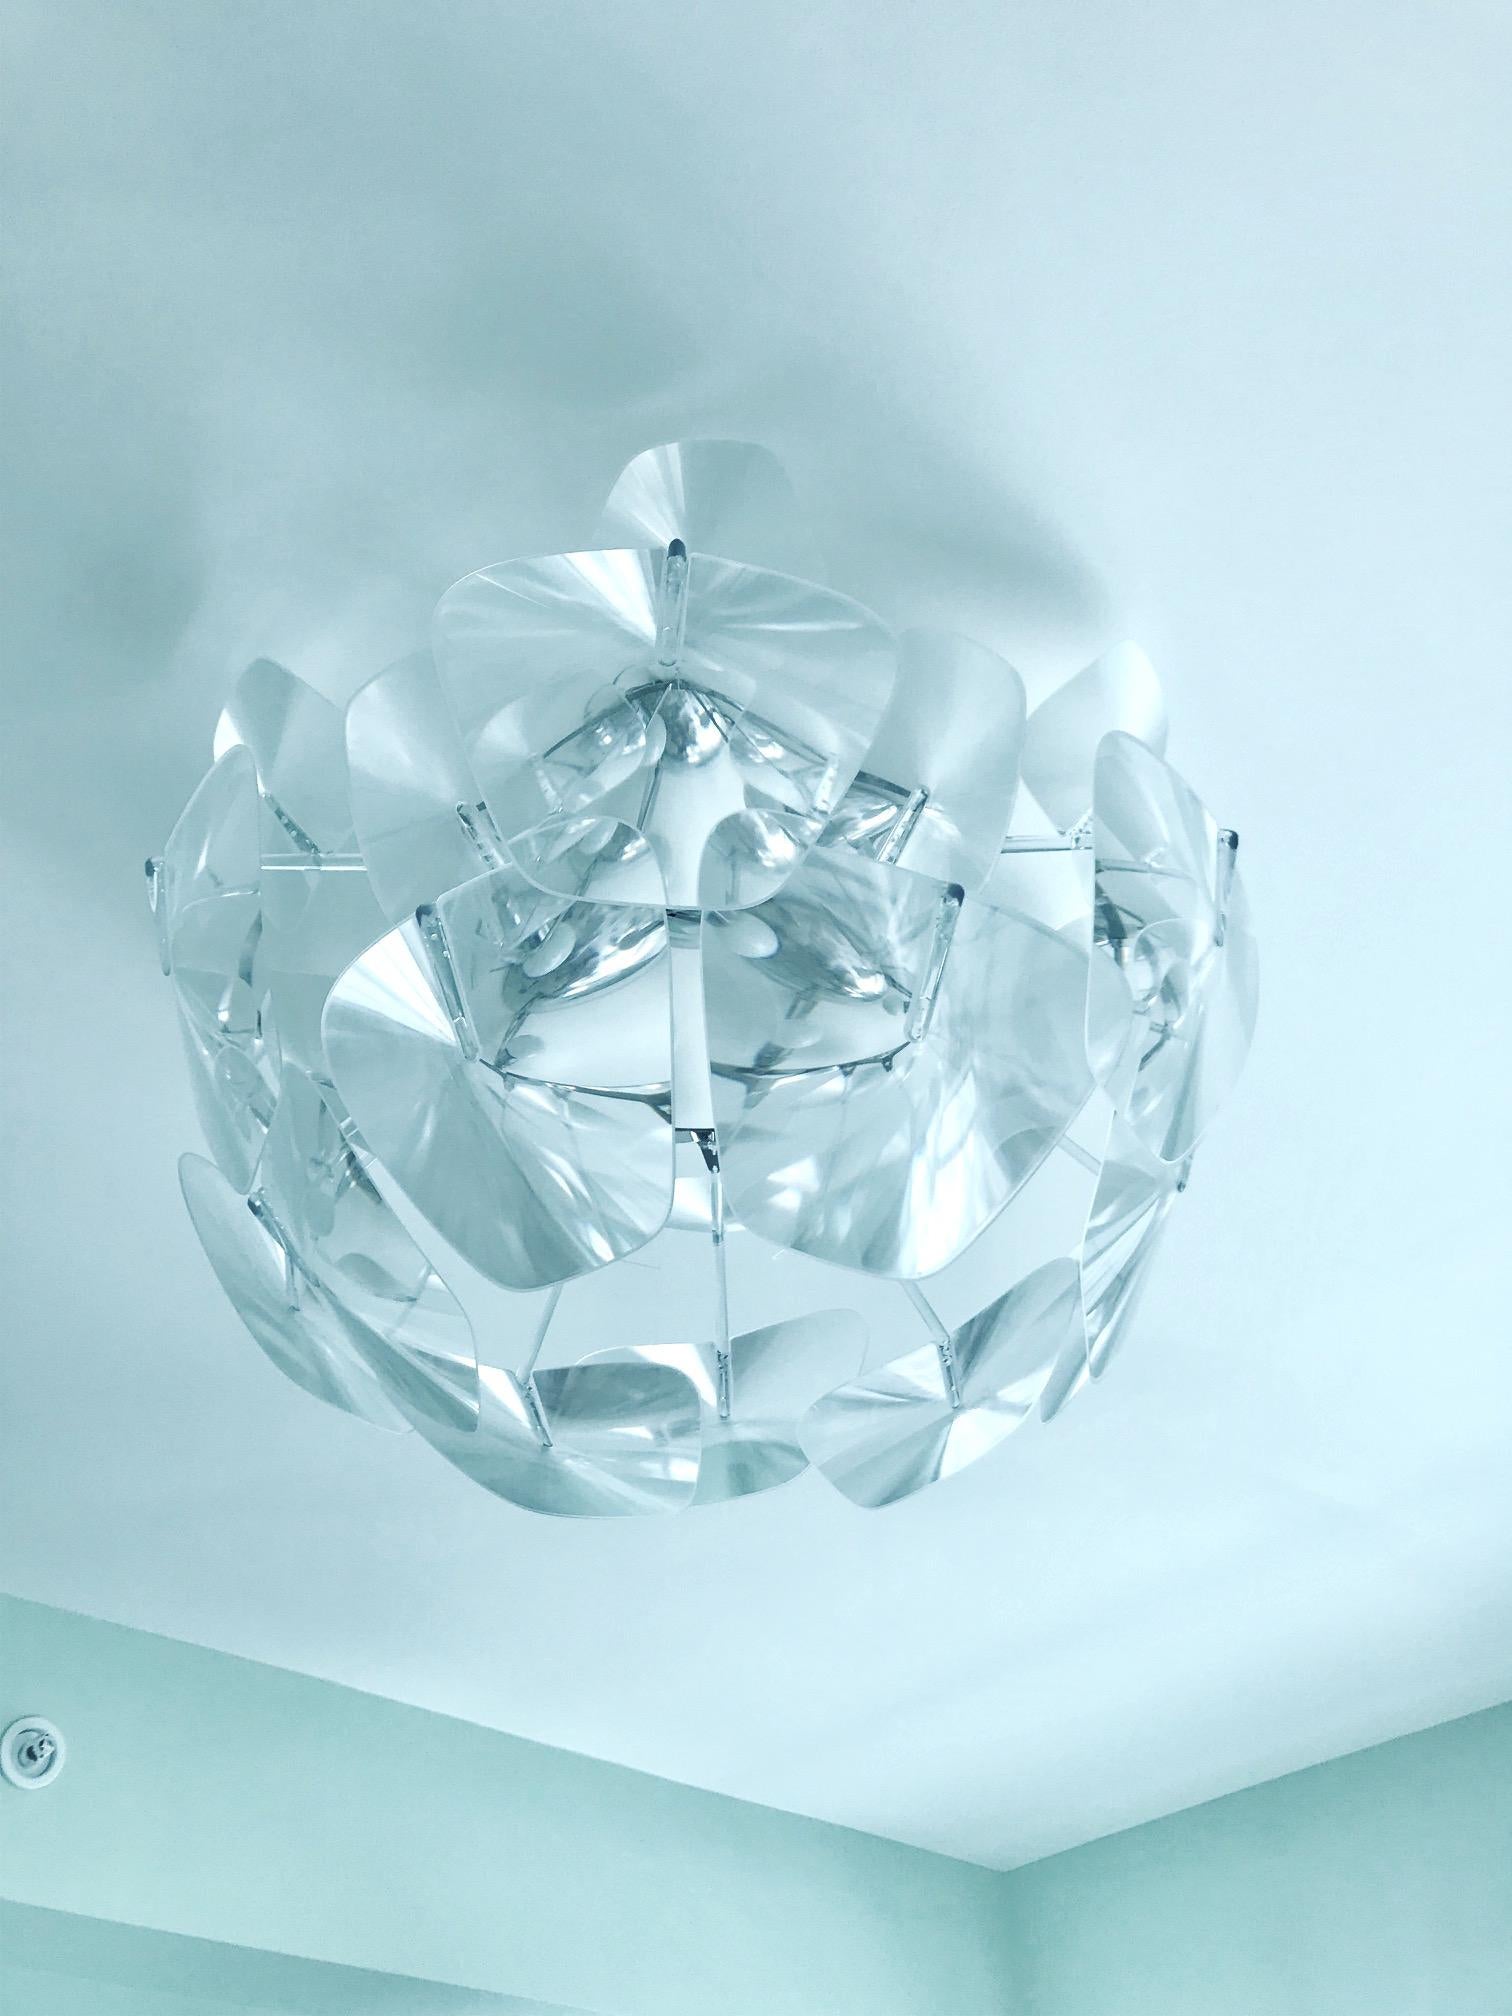 Polished Hope Modernist Ceiling Light with Reflective Prisms by Luceplan, Italy 2018